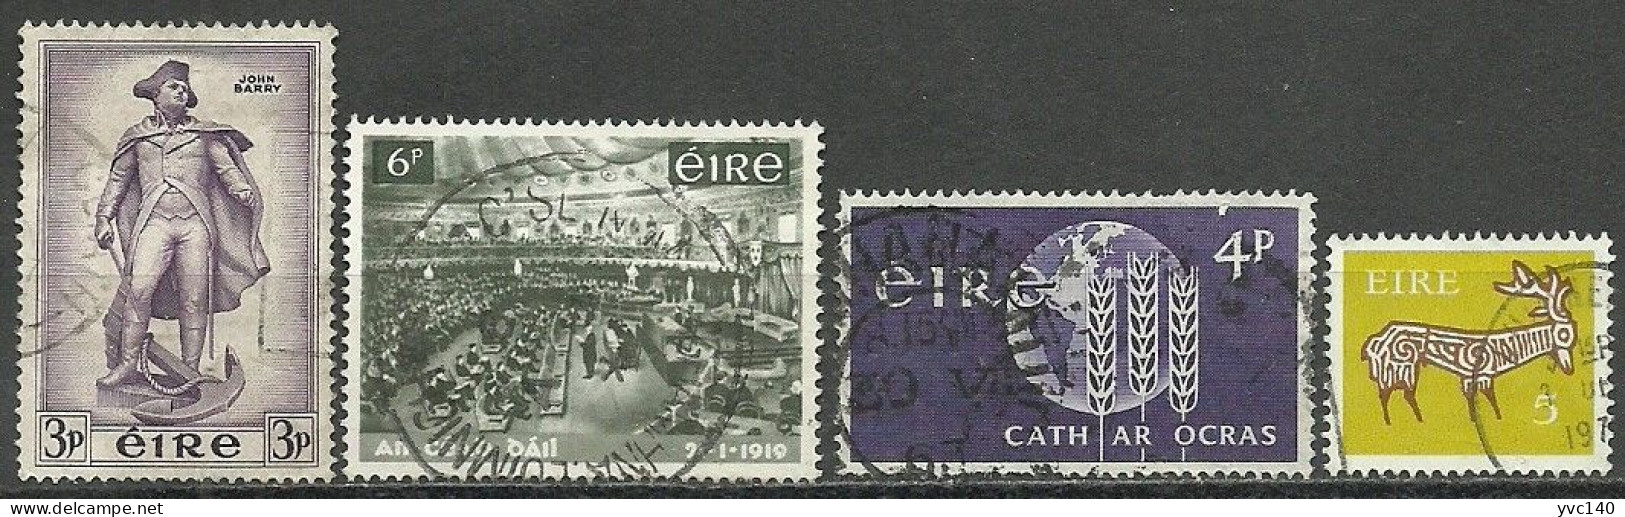 Ireland ; Used Stamps - Lots & Serien